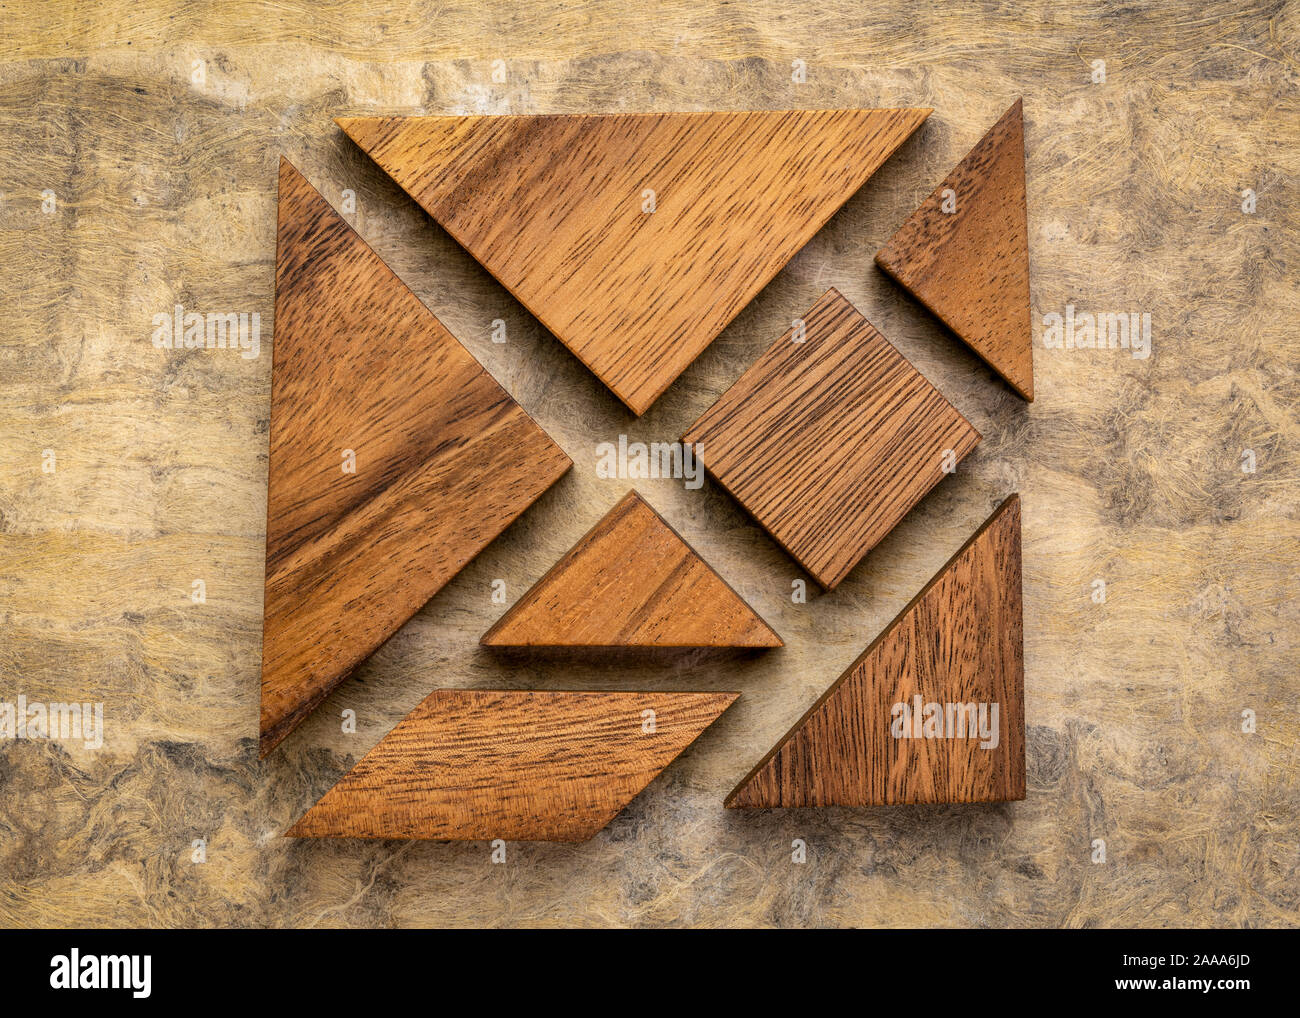 seven tangram wooden pieces, a traditional Chinese puzzle game, texture bark paper background Stock Photo